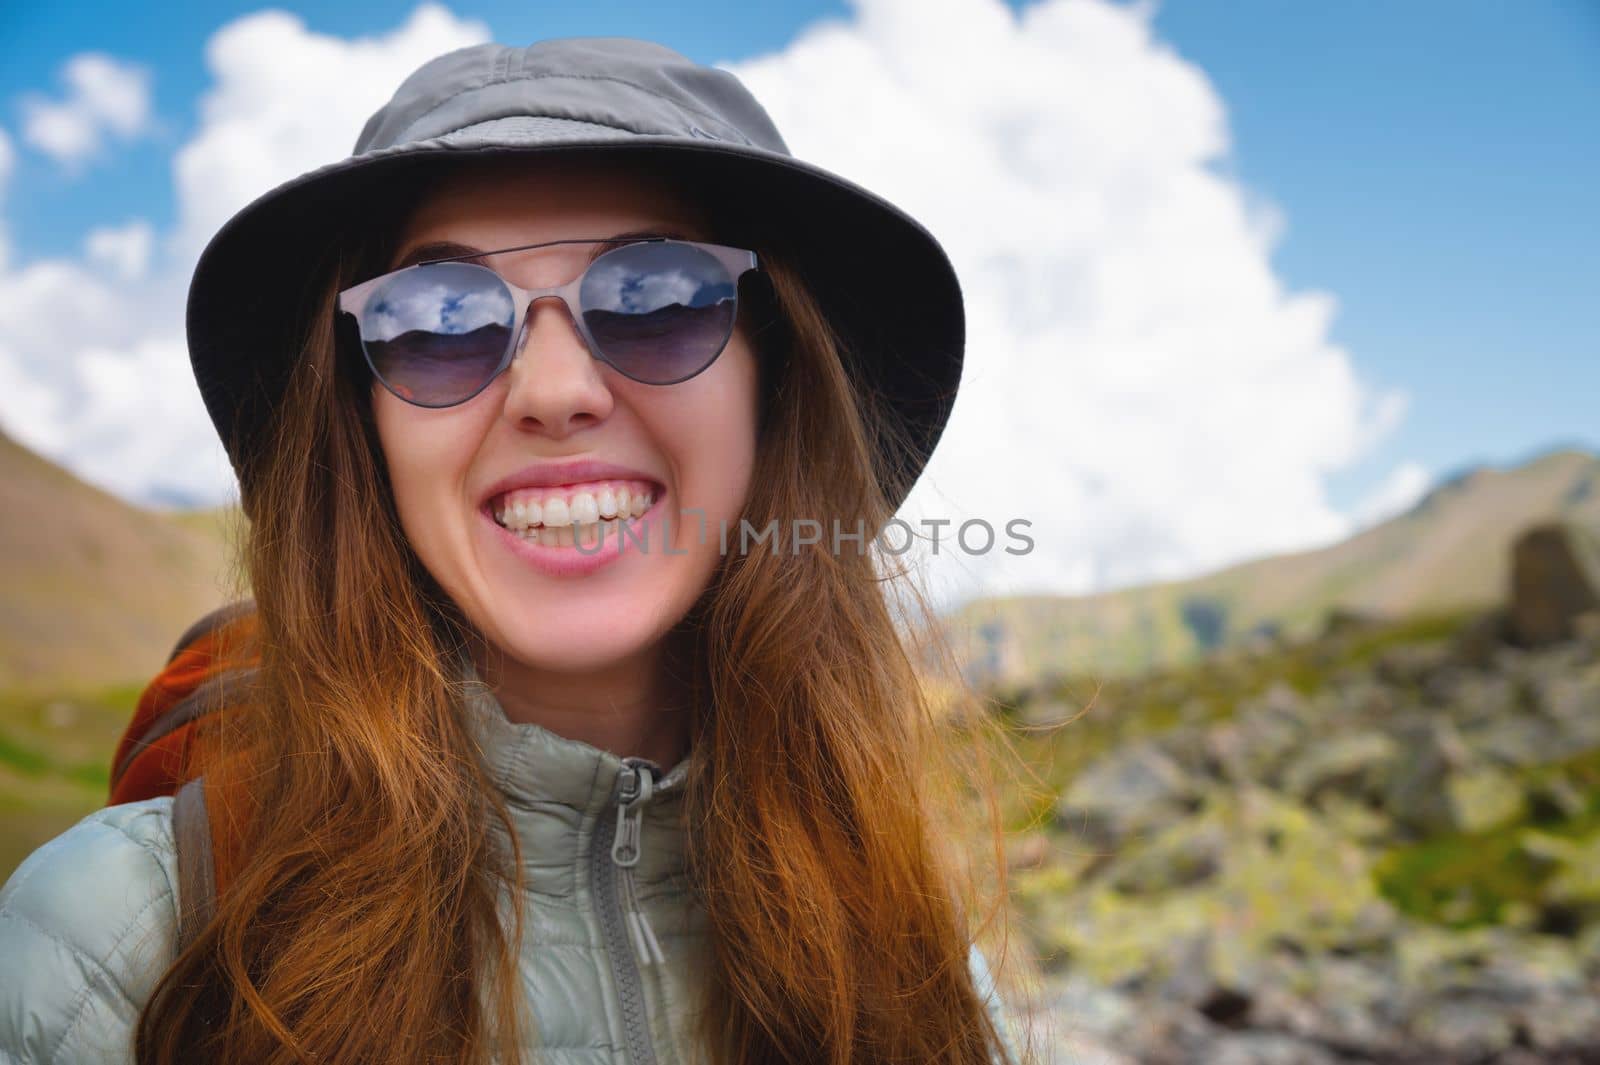 Smiling young girl against a blue cloudy sky and mountains. Portrait of a happy woman tourist in sunglasses and panama.